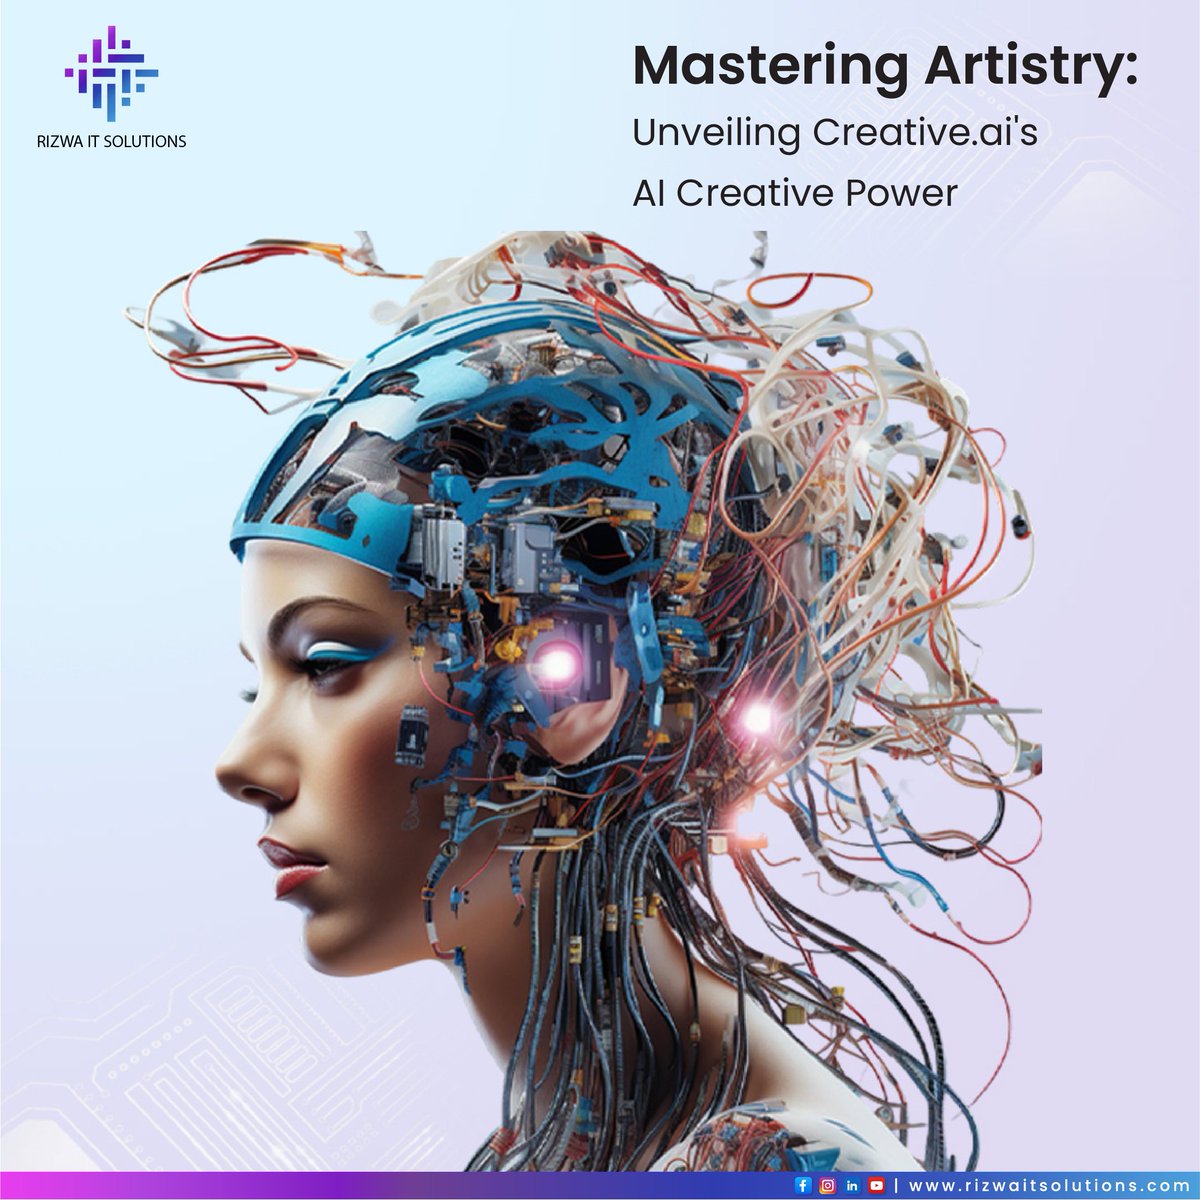 Discover the boundless creativity of AI with Creative.ai! Enter a realm where technology seamlessly merges with imagination
-
rizwaitsolutions.com/unlocking-crea…
-
#AIArt #CreativityUnleashed #ArtTech #Rizwaitsolutions #Creativeai #RIS #FutureOfAI